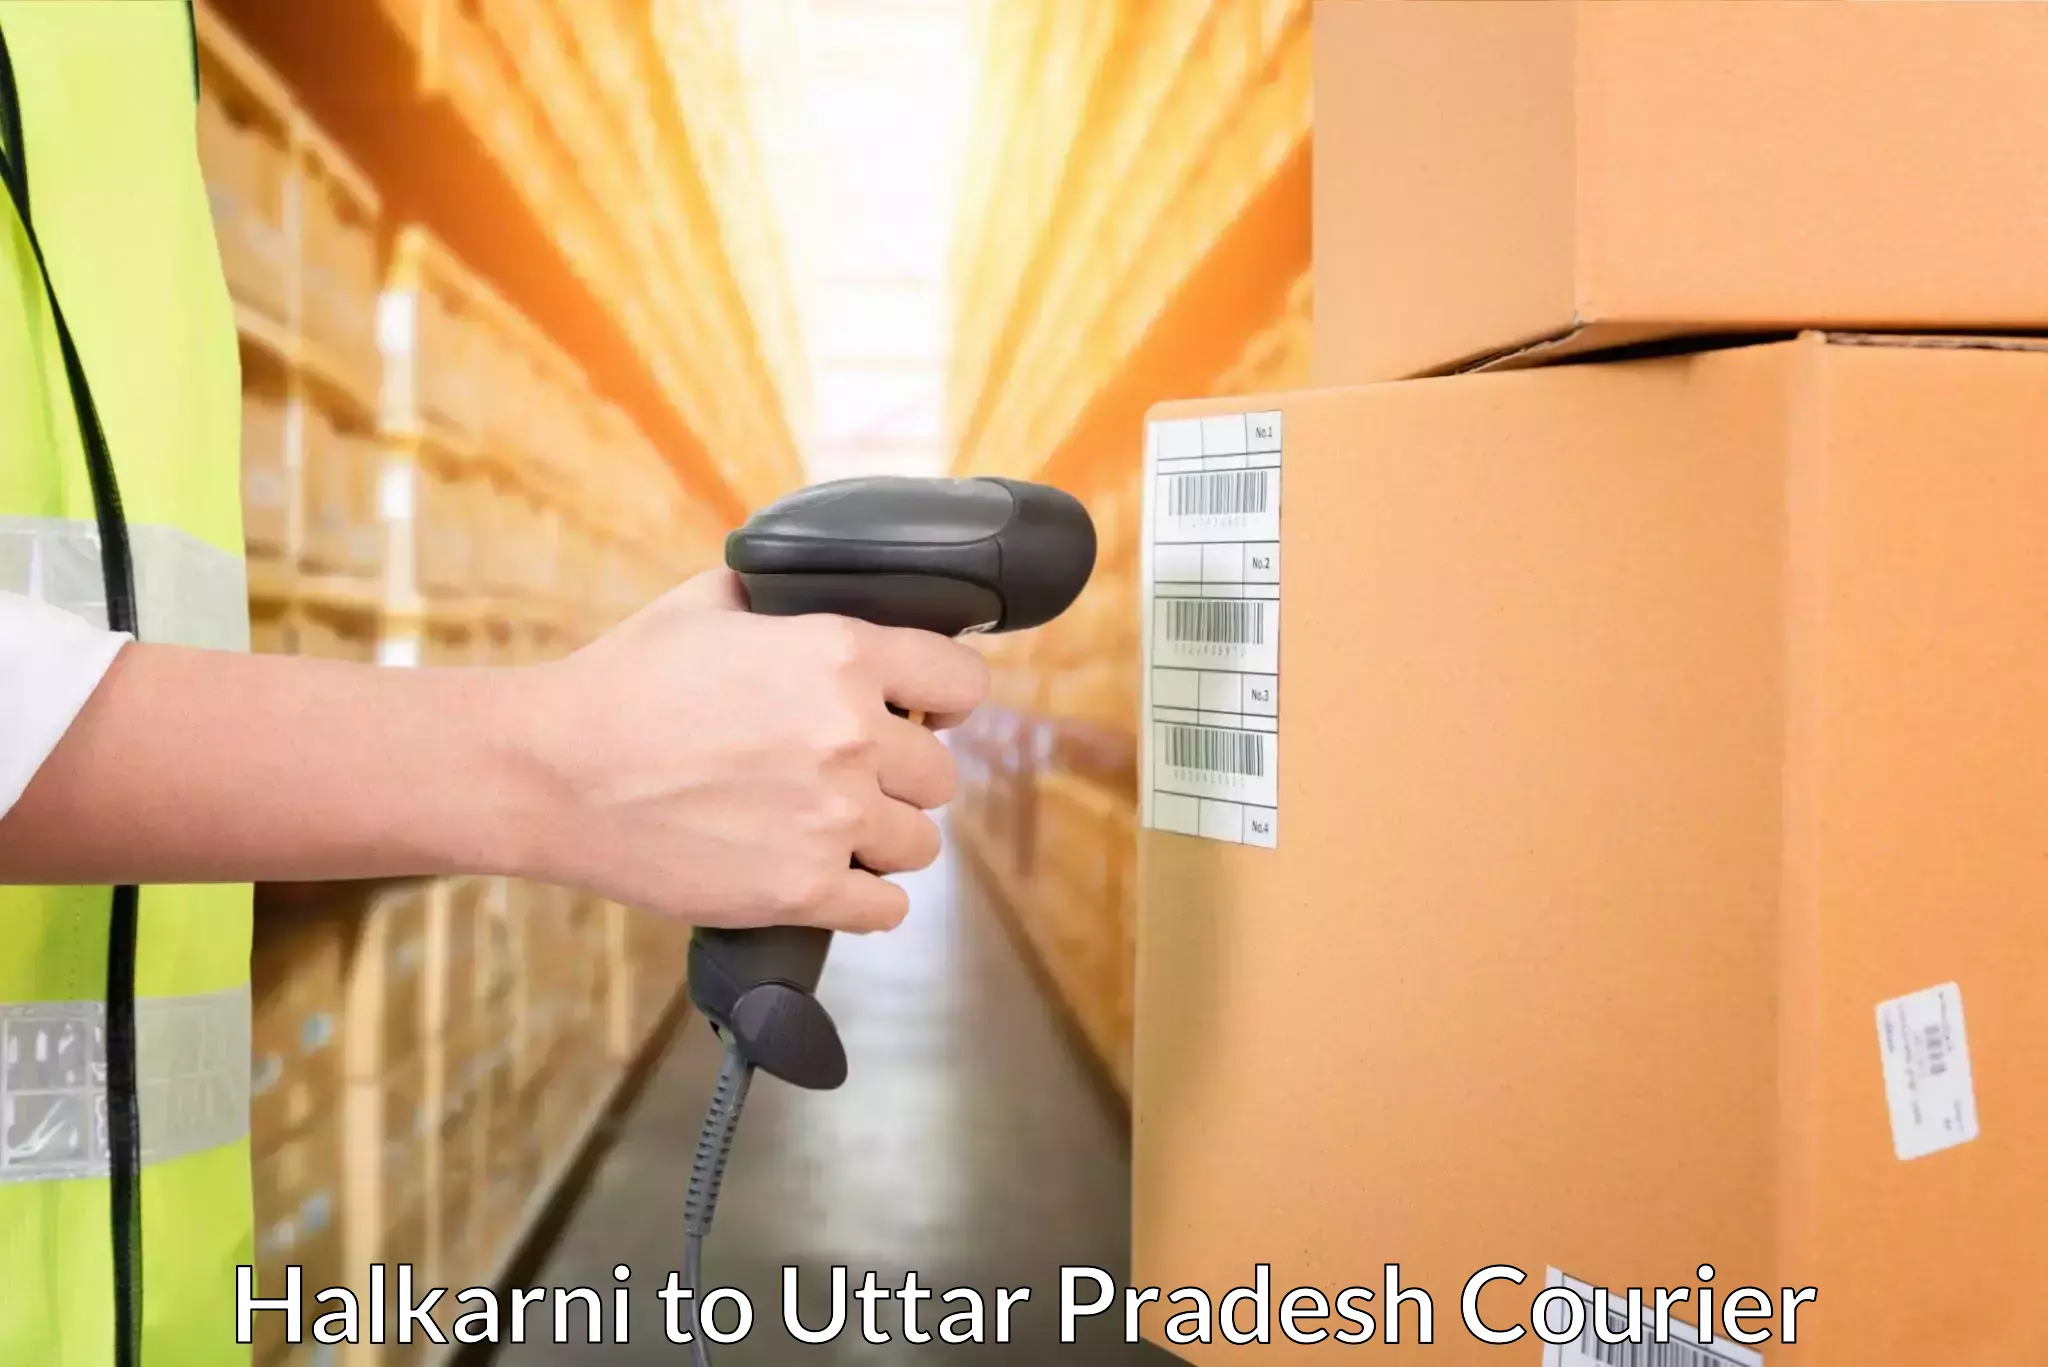 Cash on delivery service Halkarni to Agra